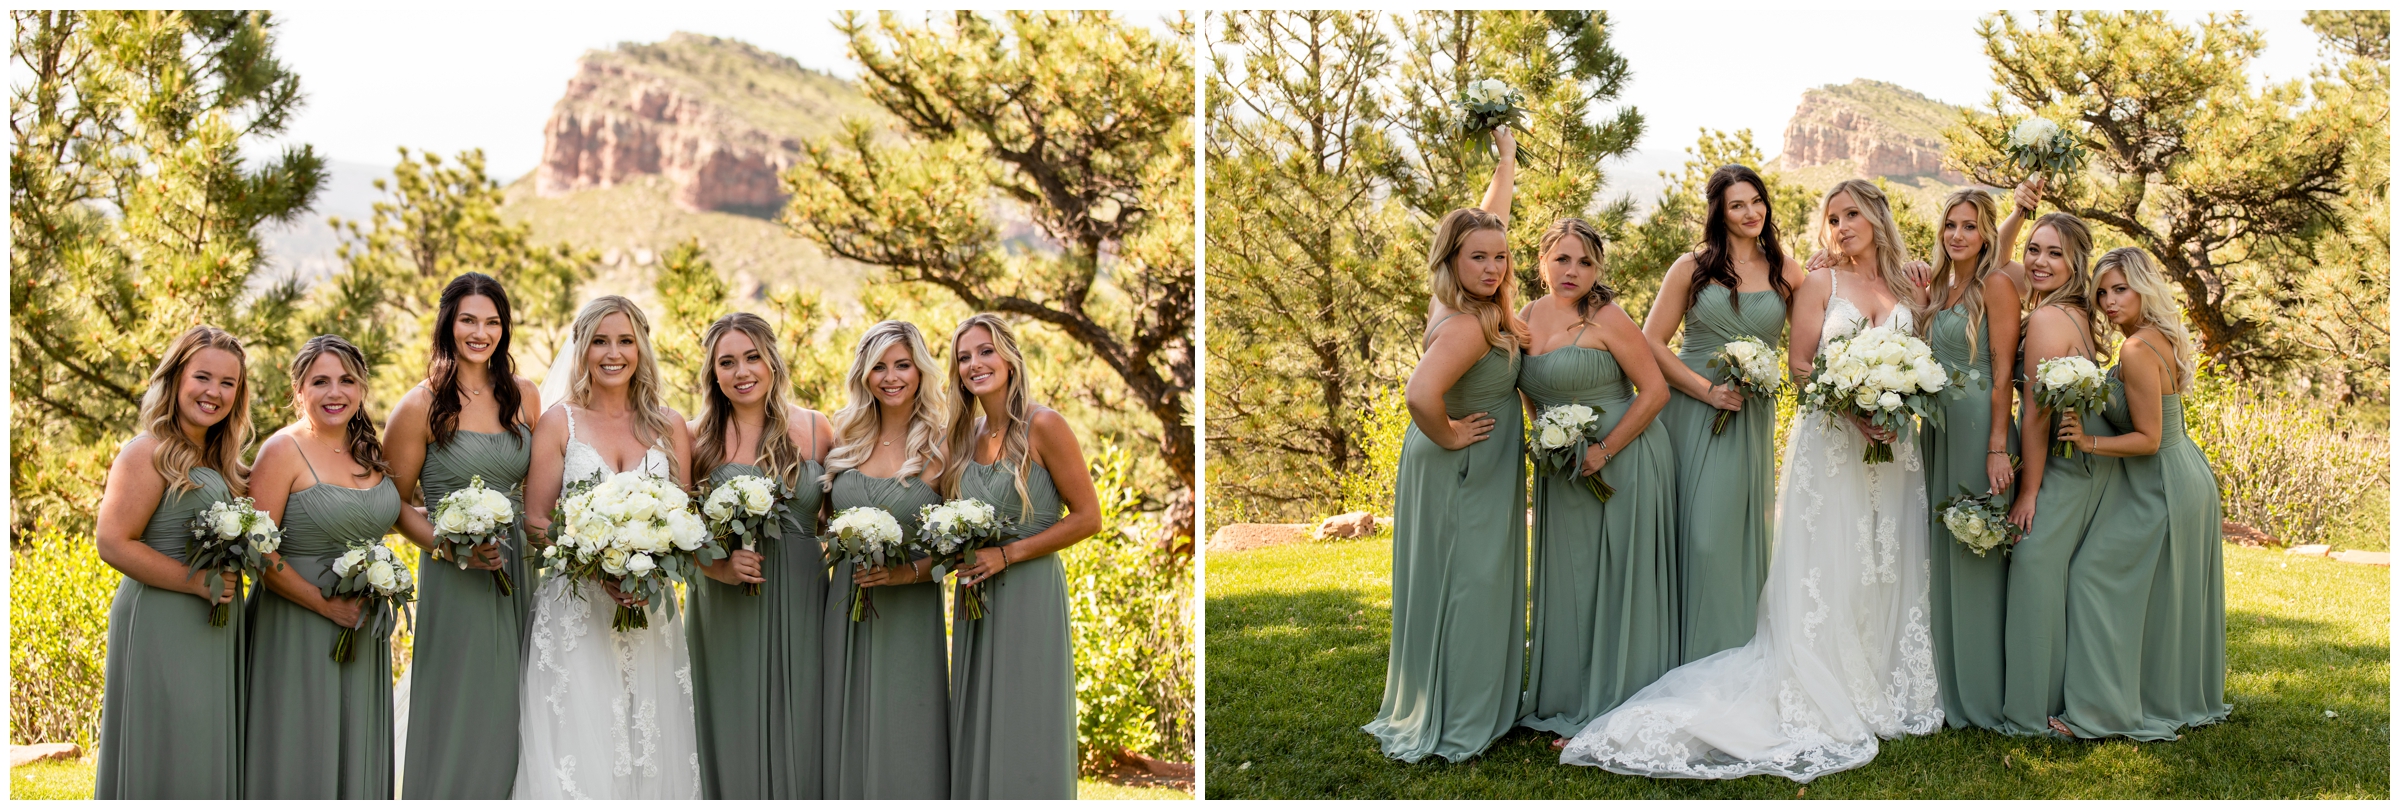 bridesmaids in long sage green dresses posing for Colorado mountain wedding pictures 